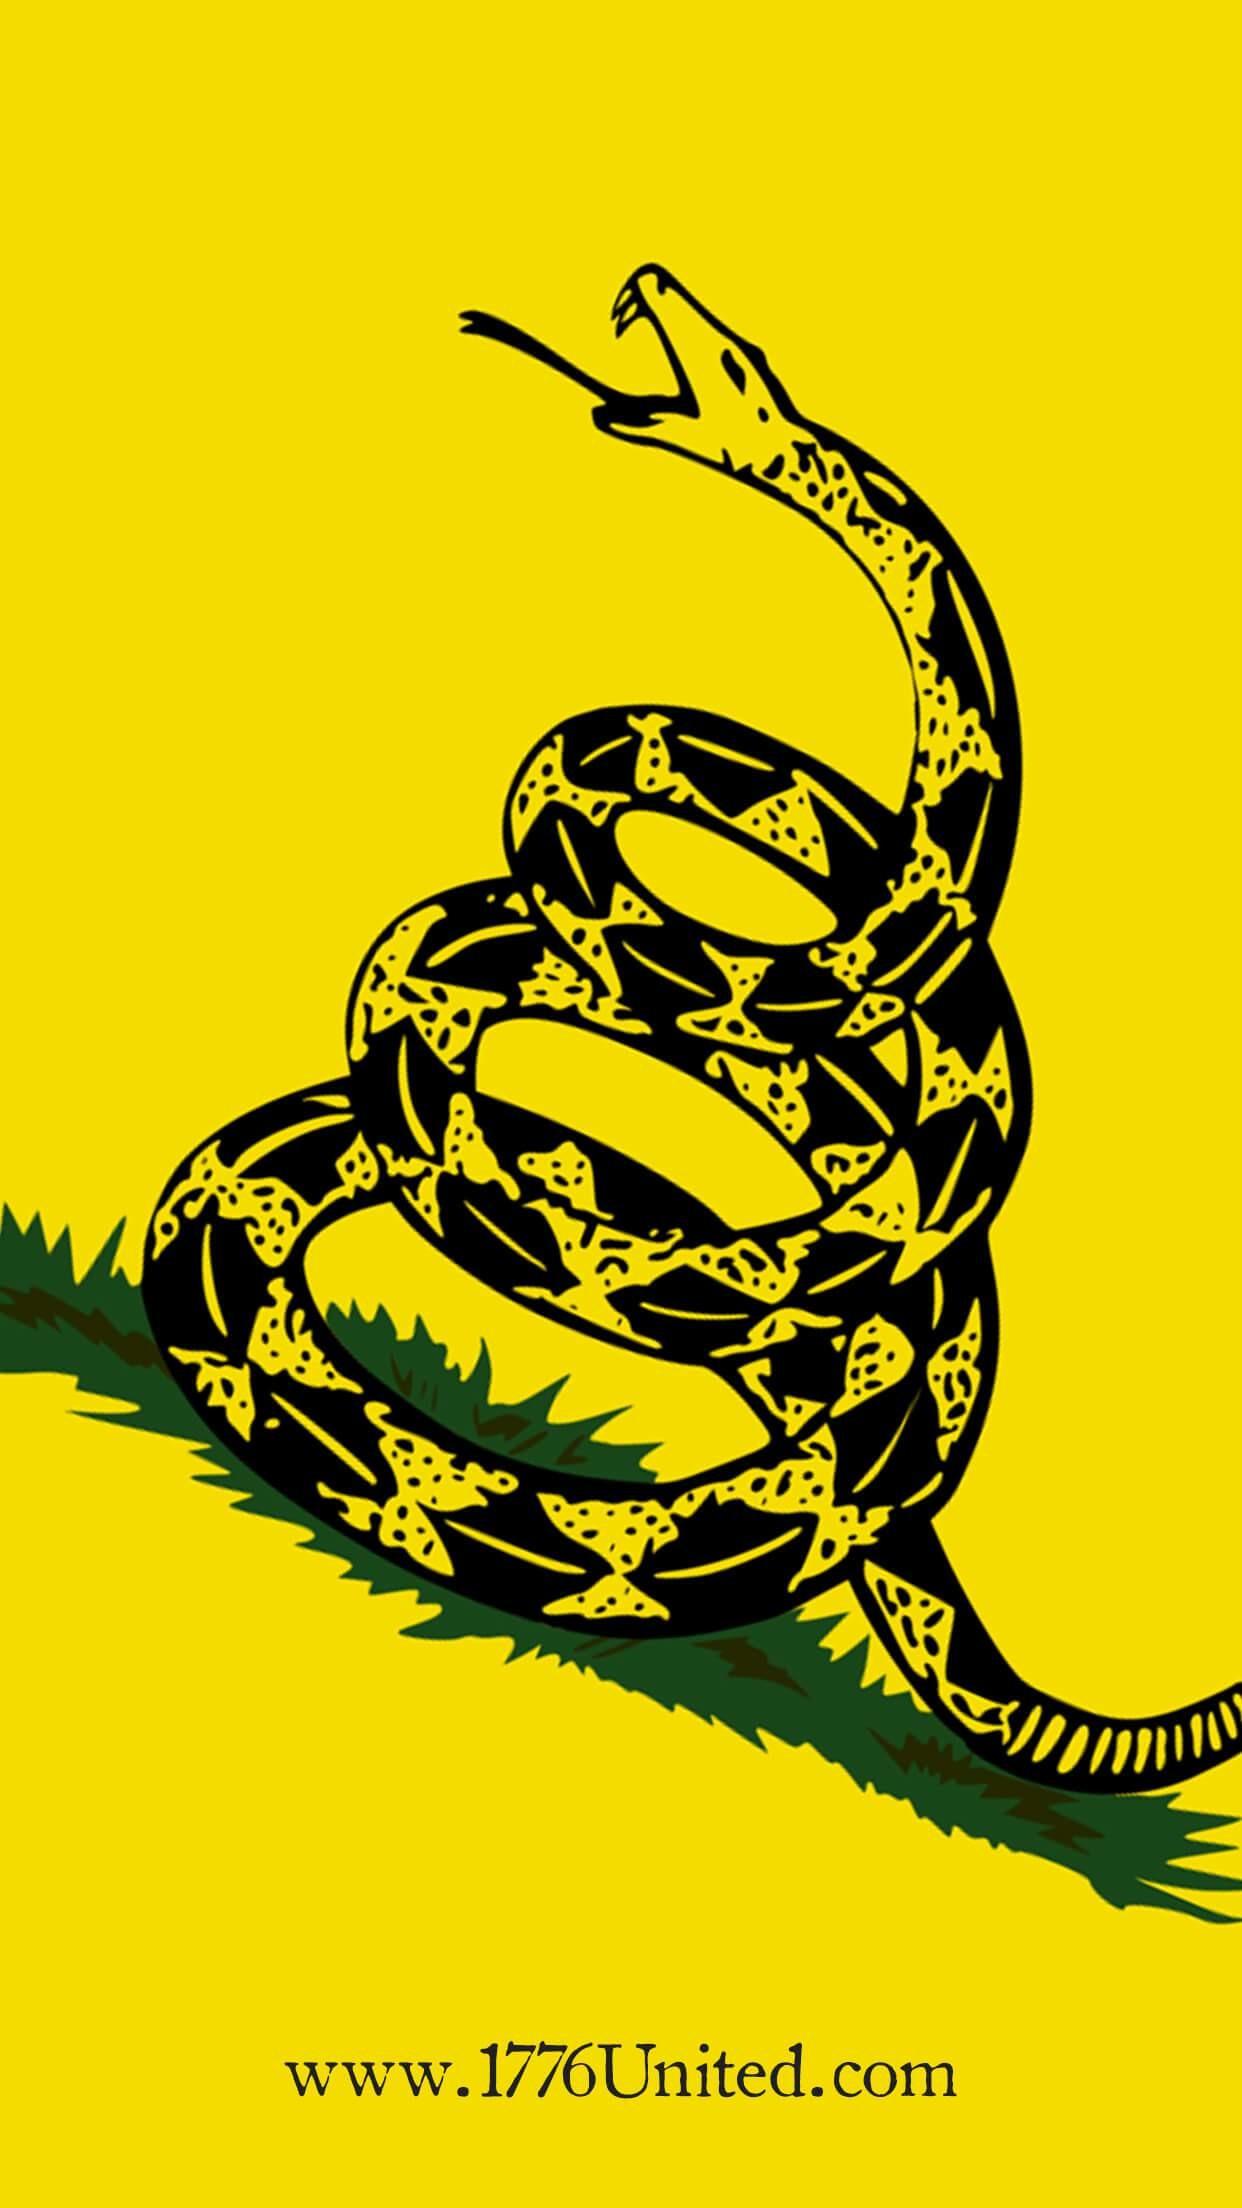 Dont Tread On Me Wallpaper T Tread On Me Wallpaper & Background Download